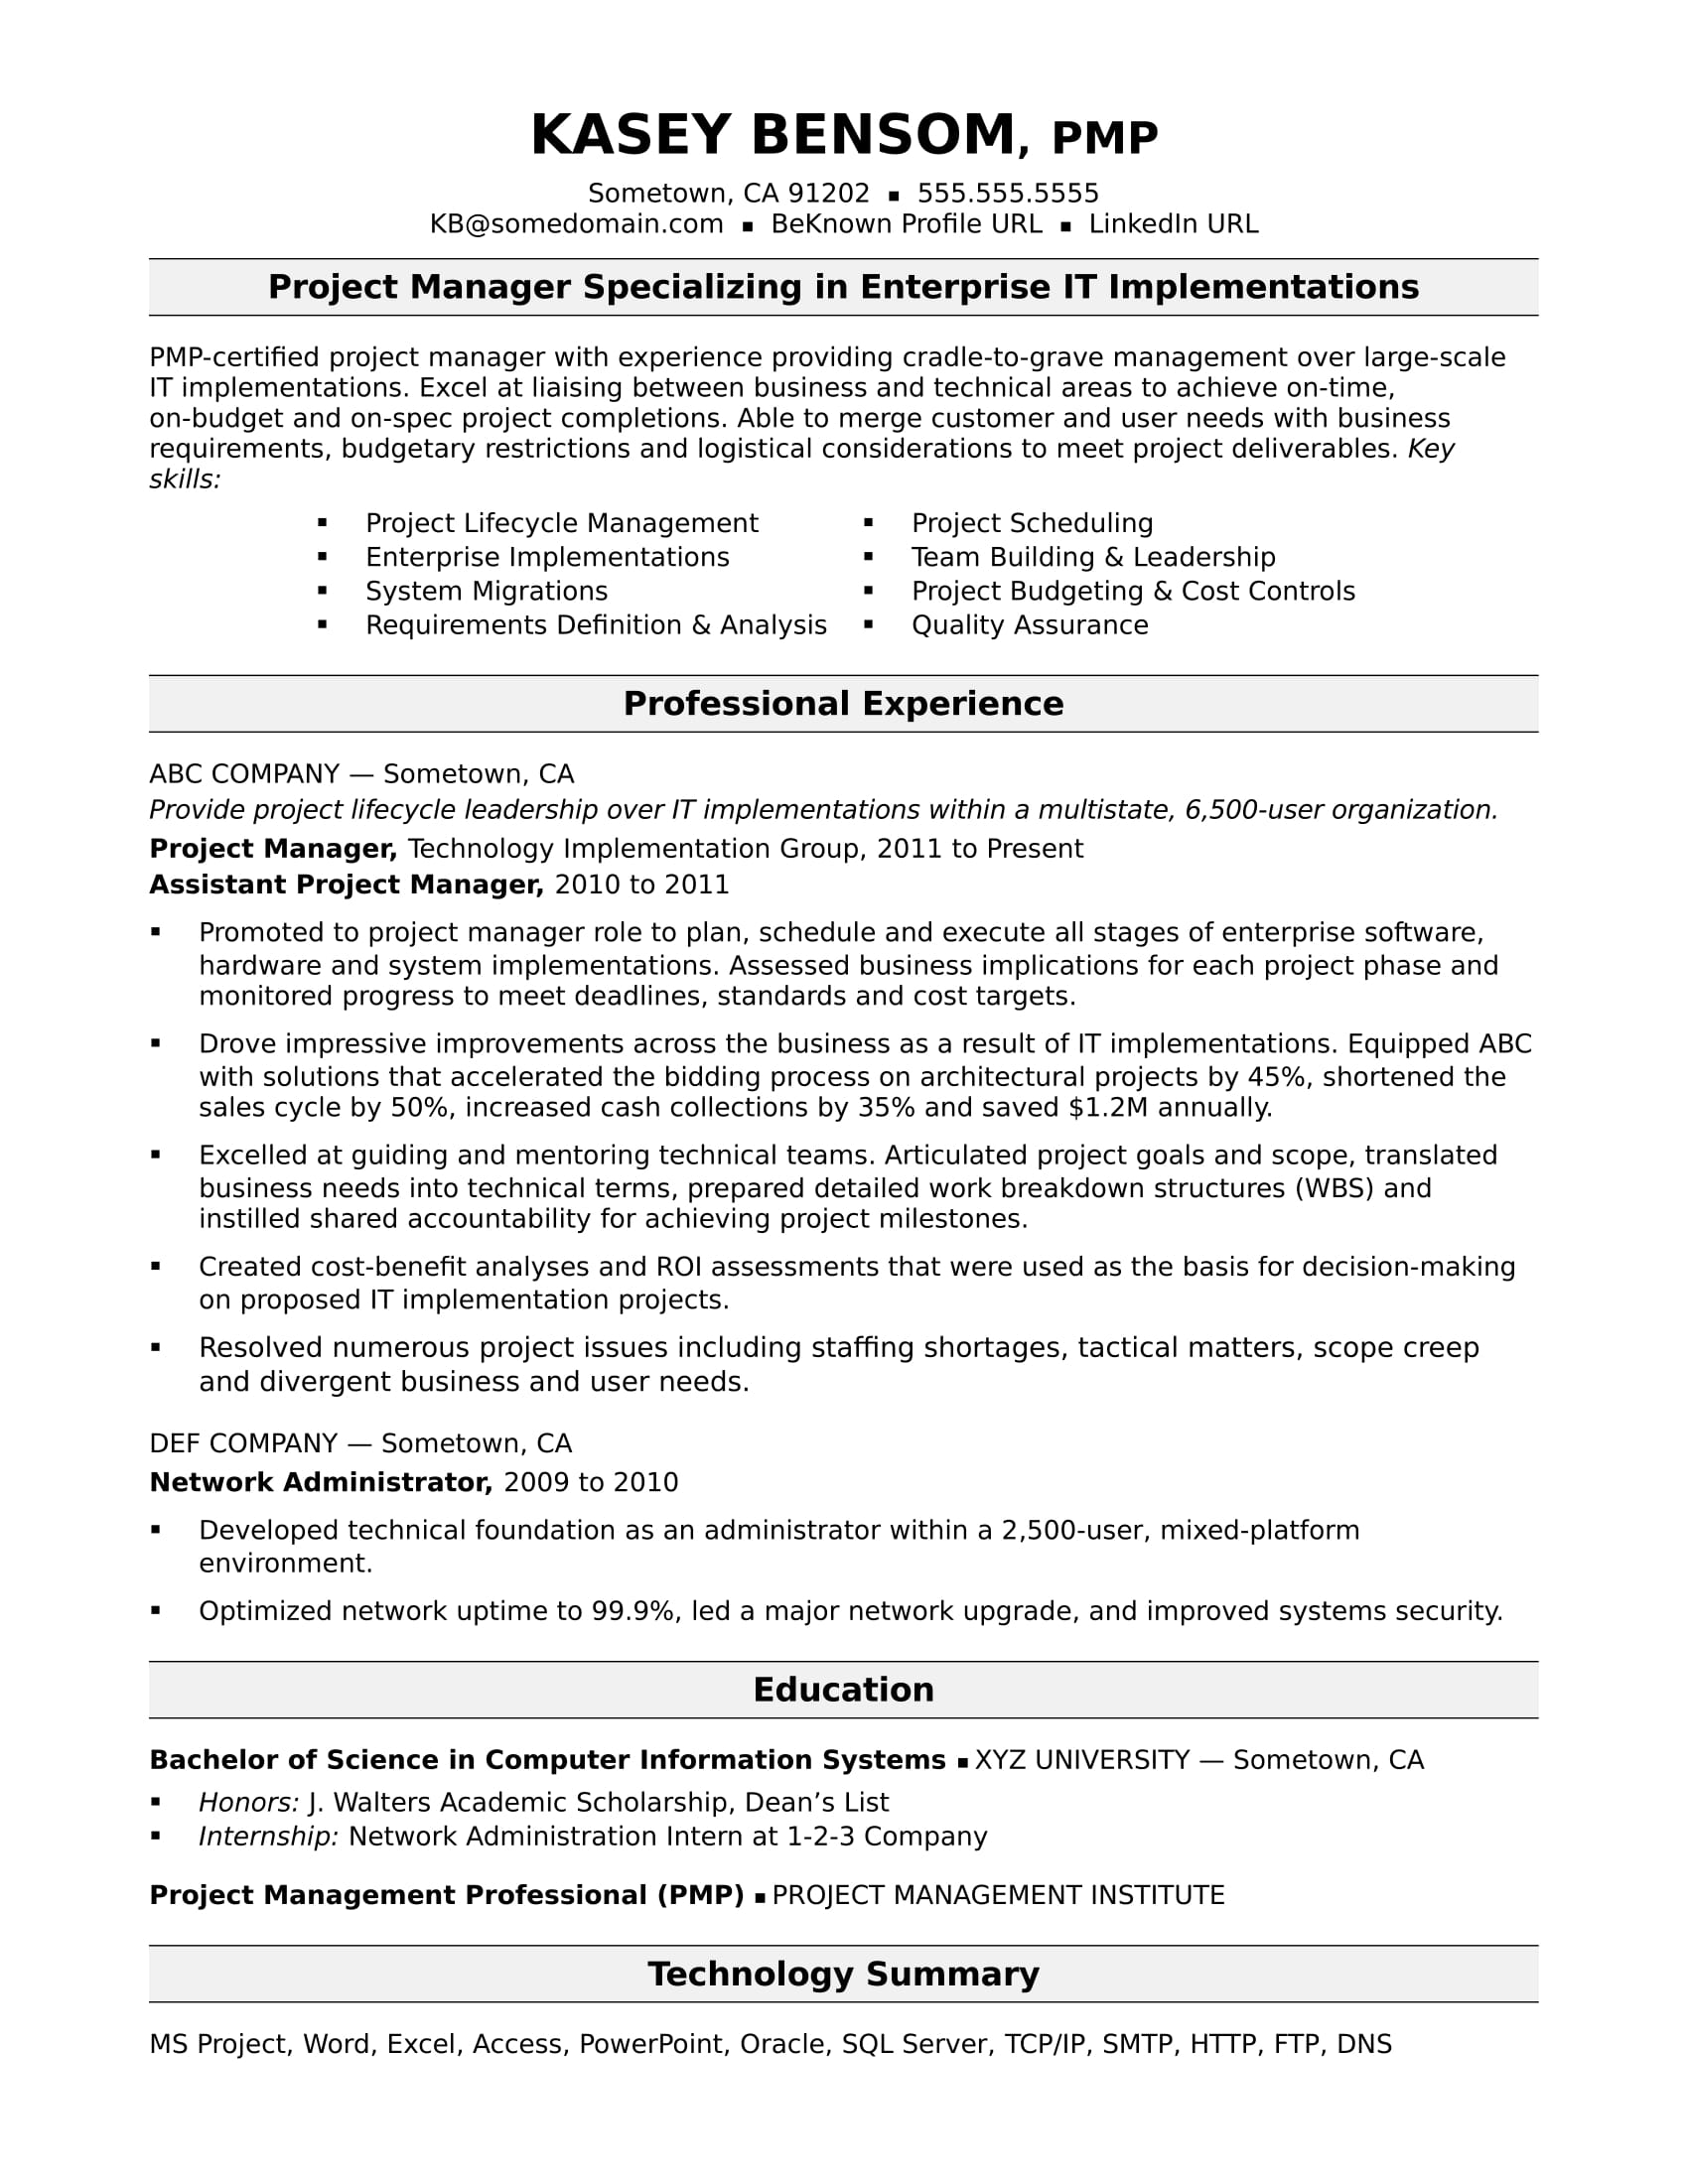 Sample Project Manager Resume Profile Project Manager Resume 2019